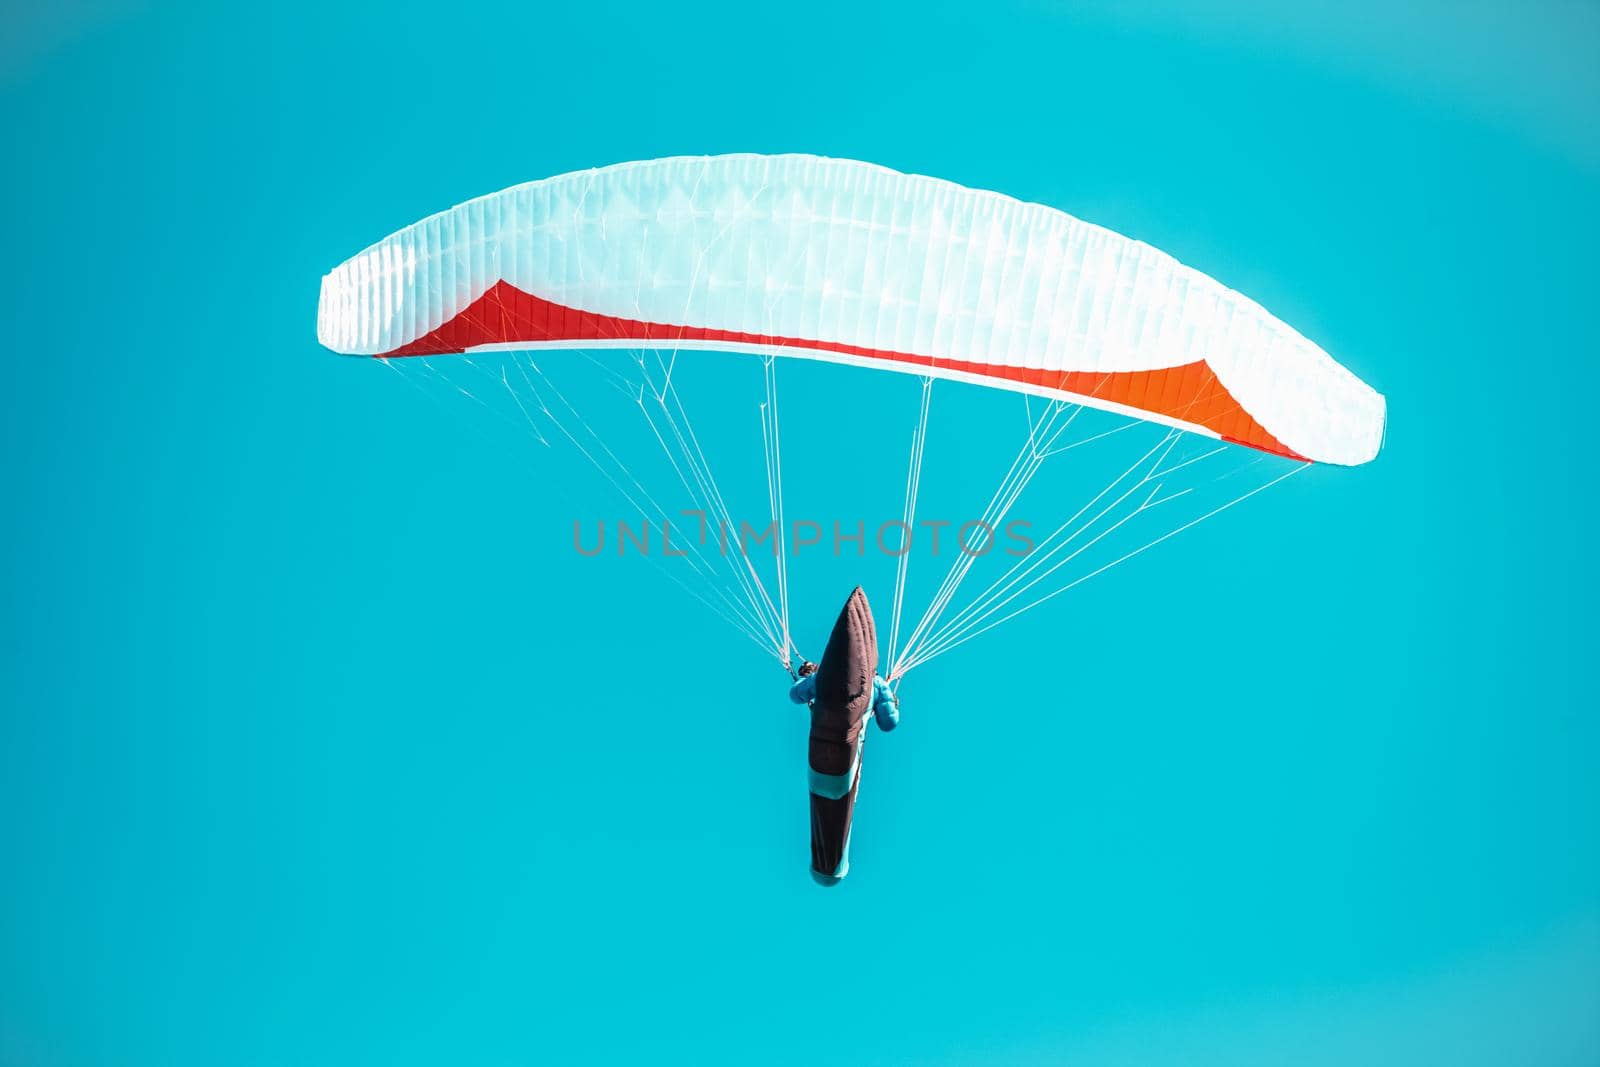 sailing on a paraglider in the blue sky by Edophoto